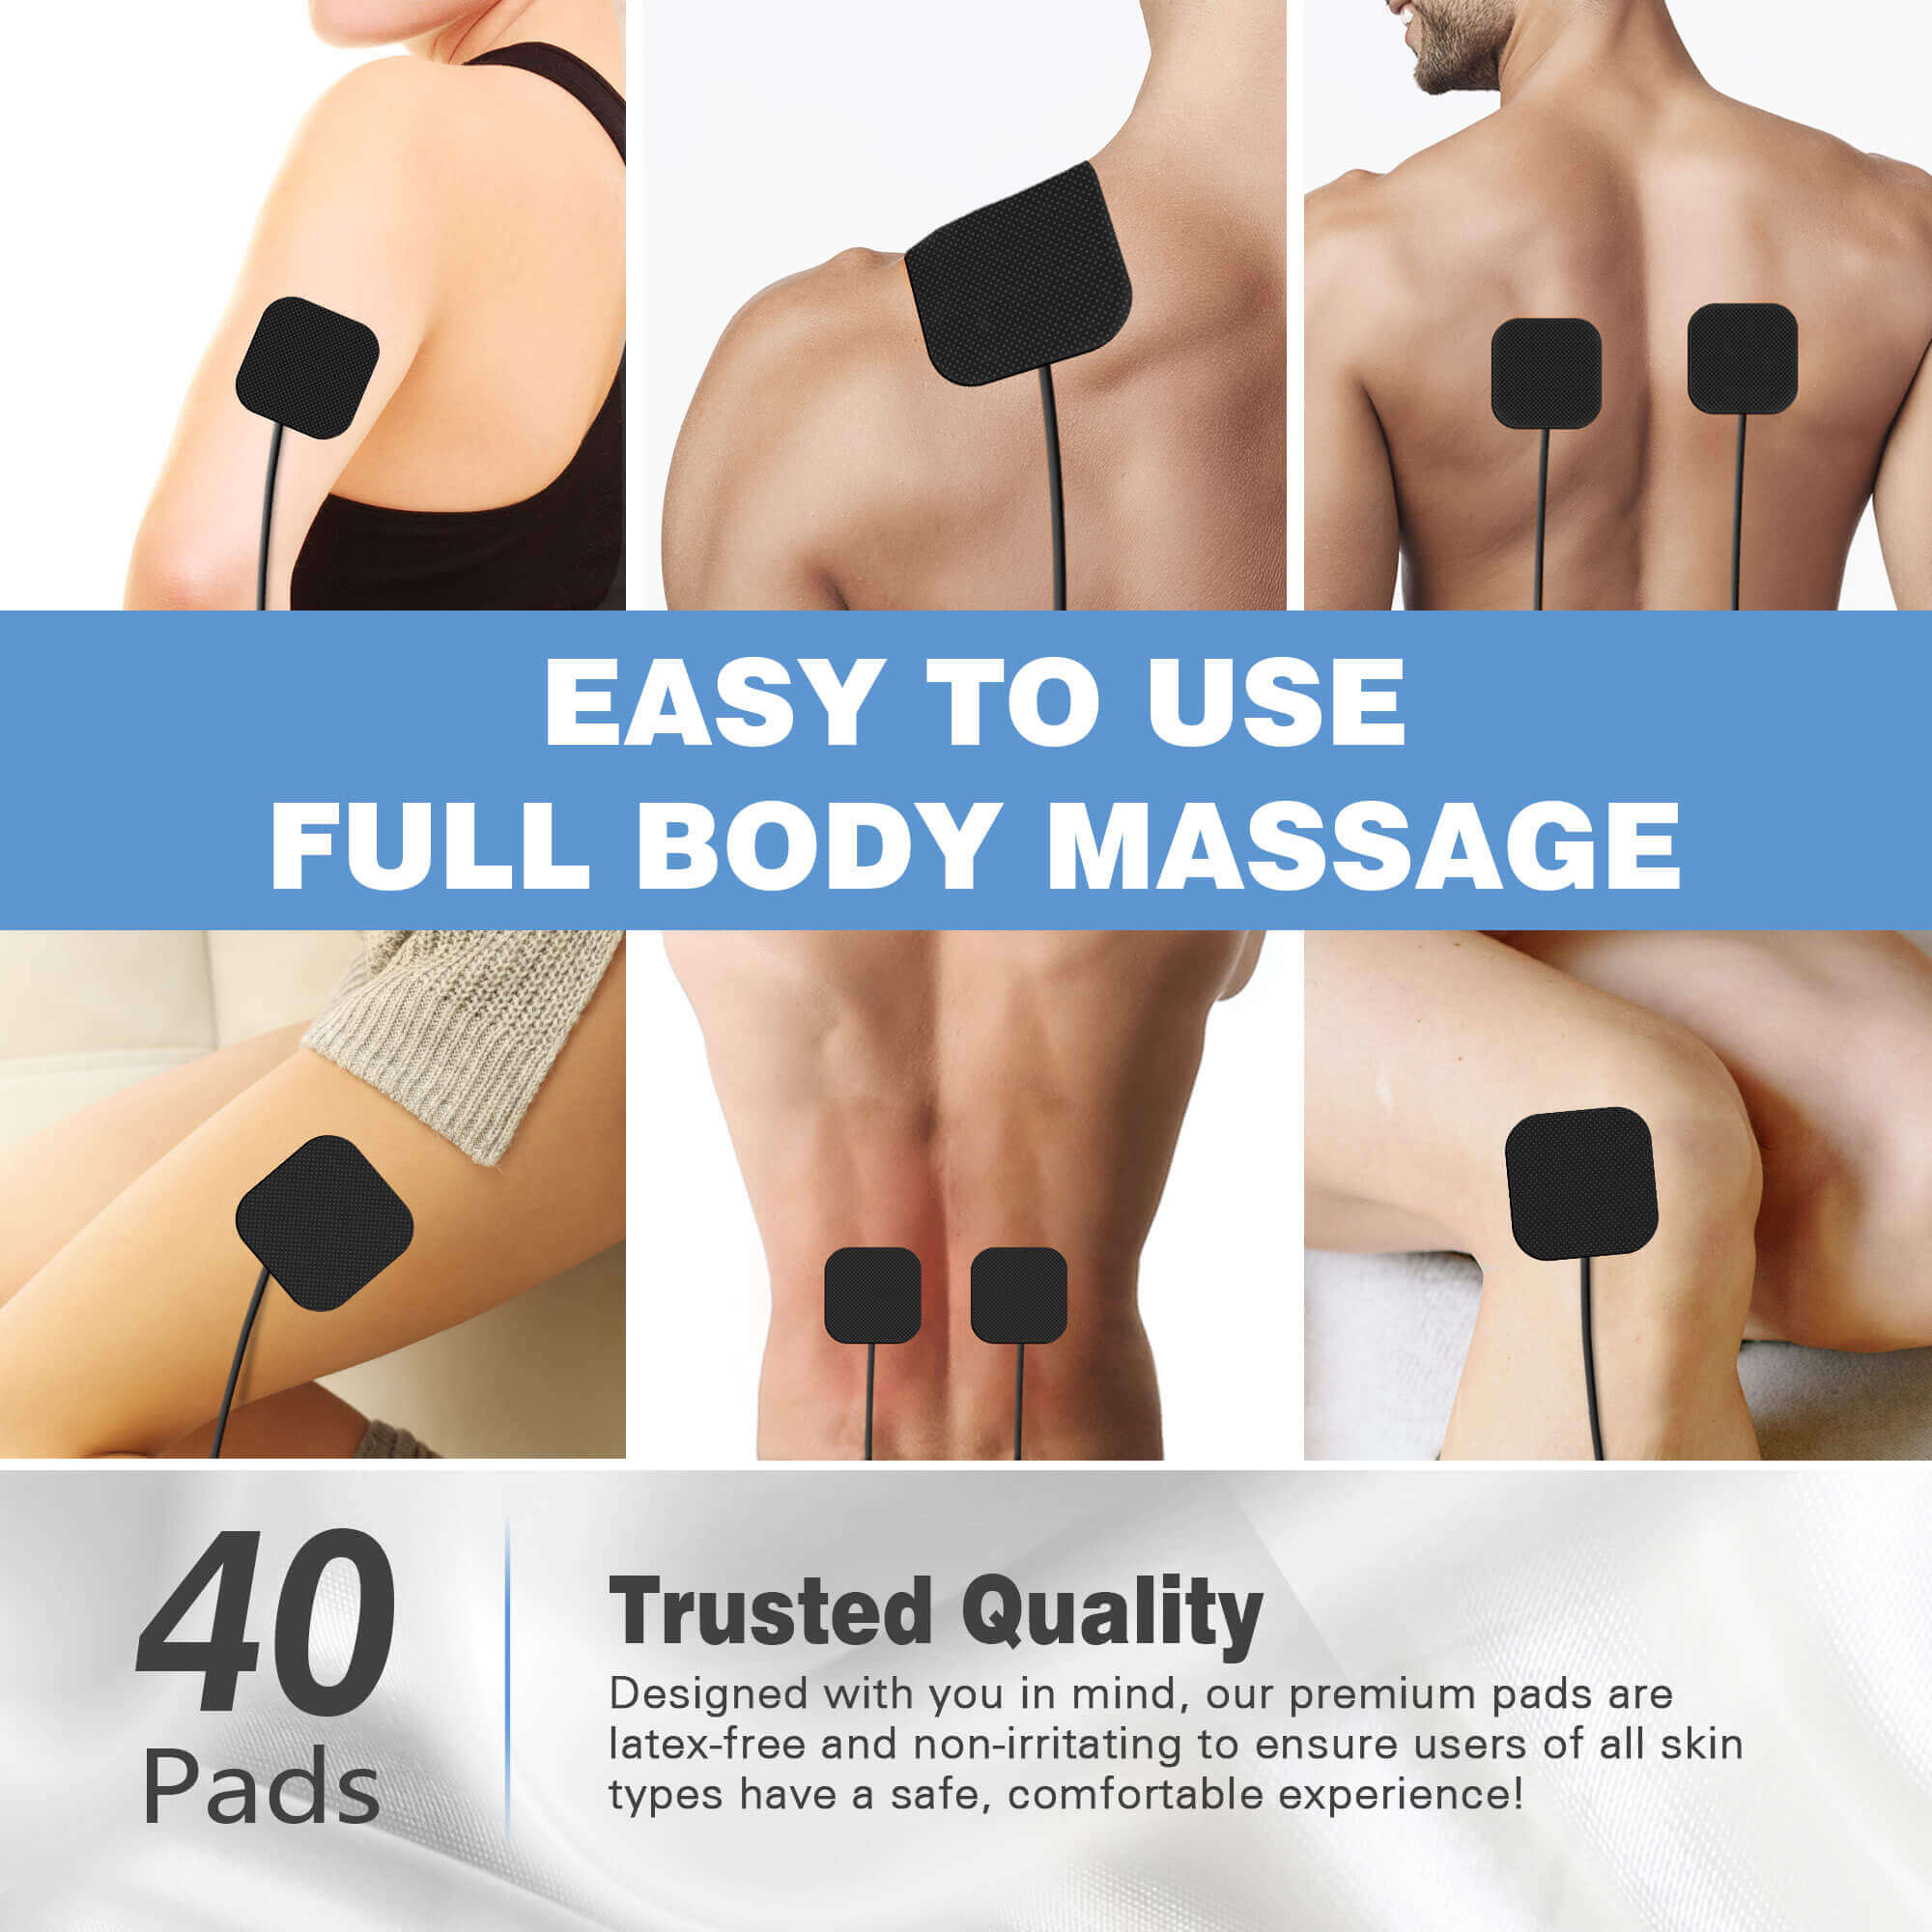 DONECO replacement pads for tens unit - 40 Pcs - 2x2in easy to use full body massage